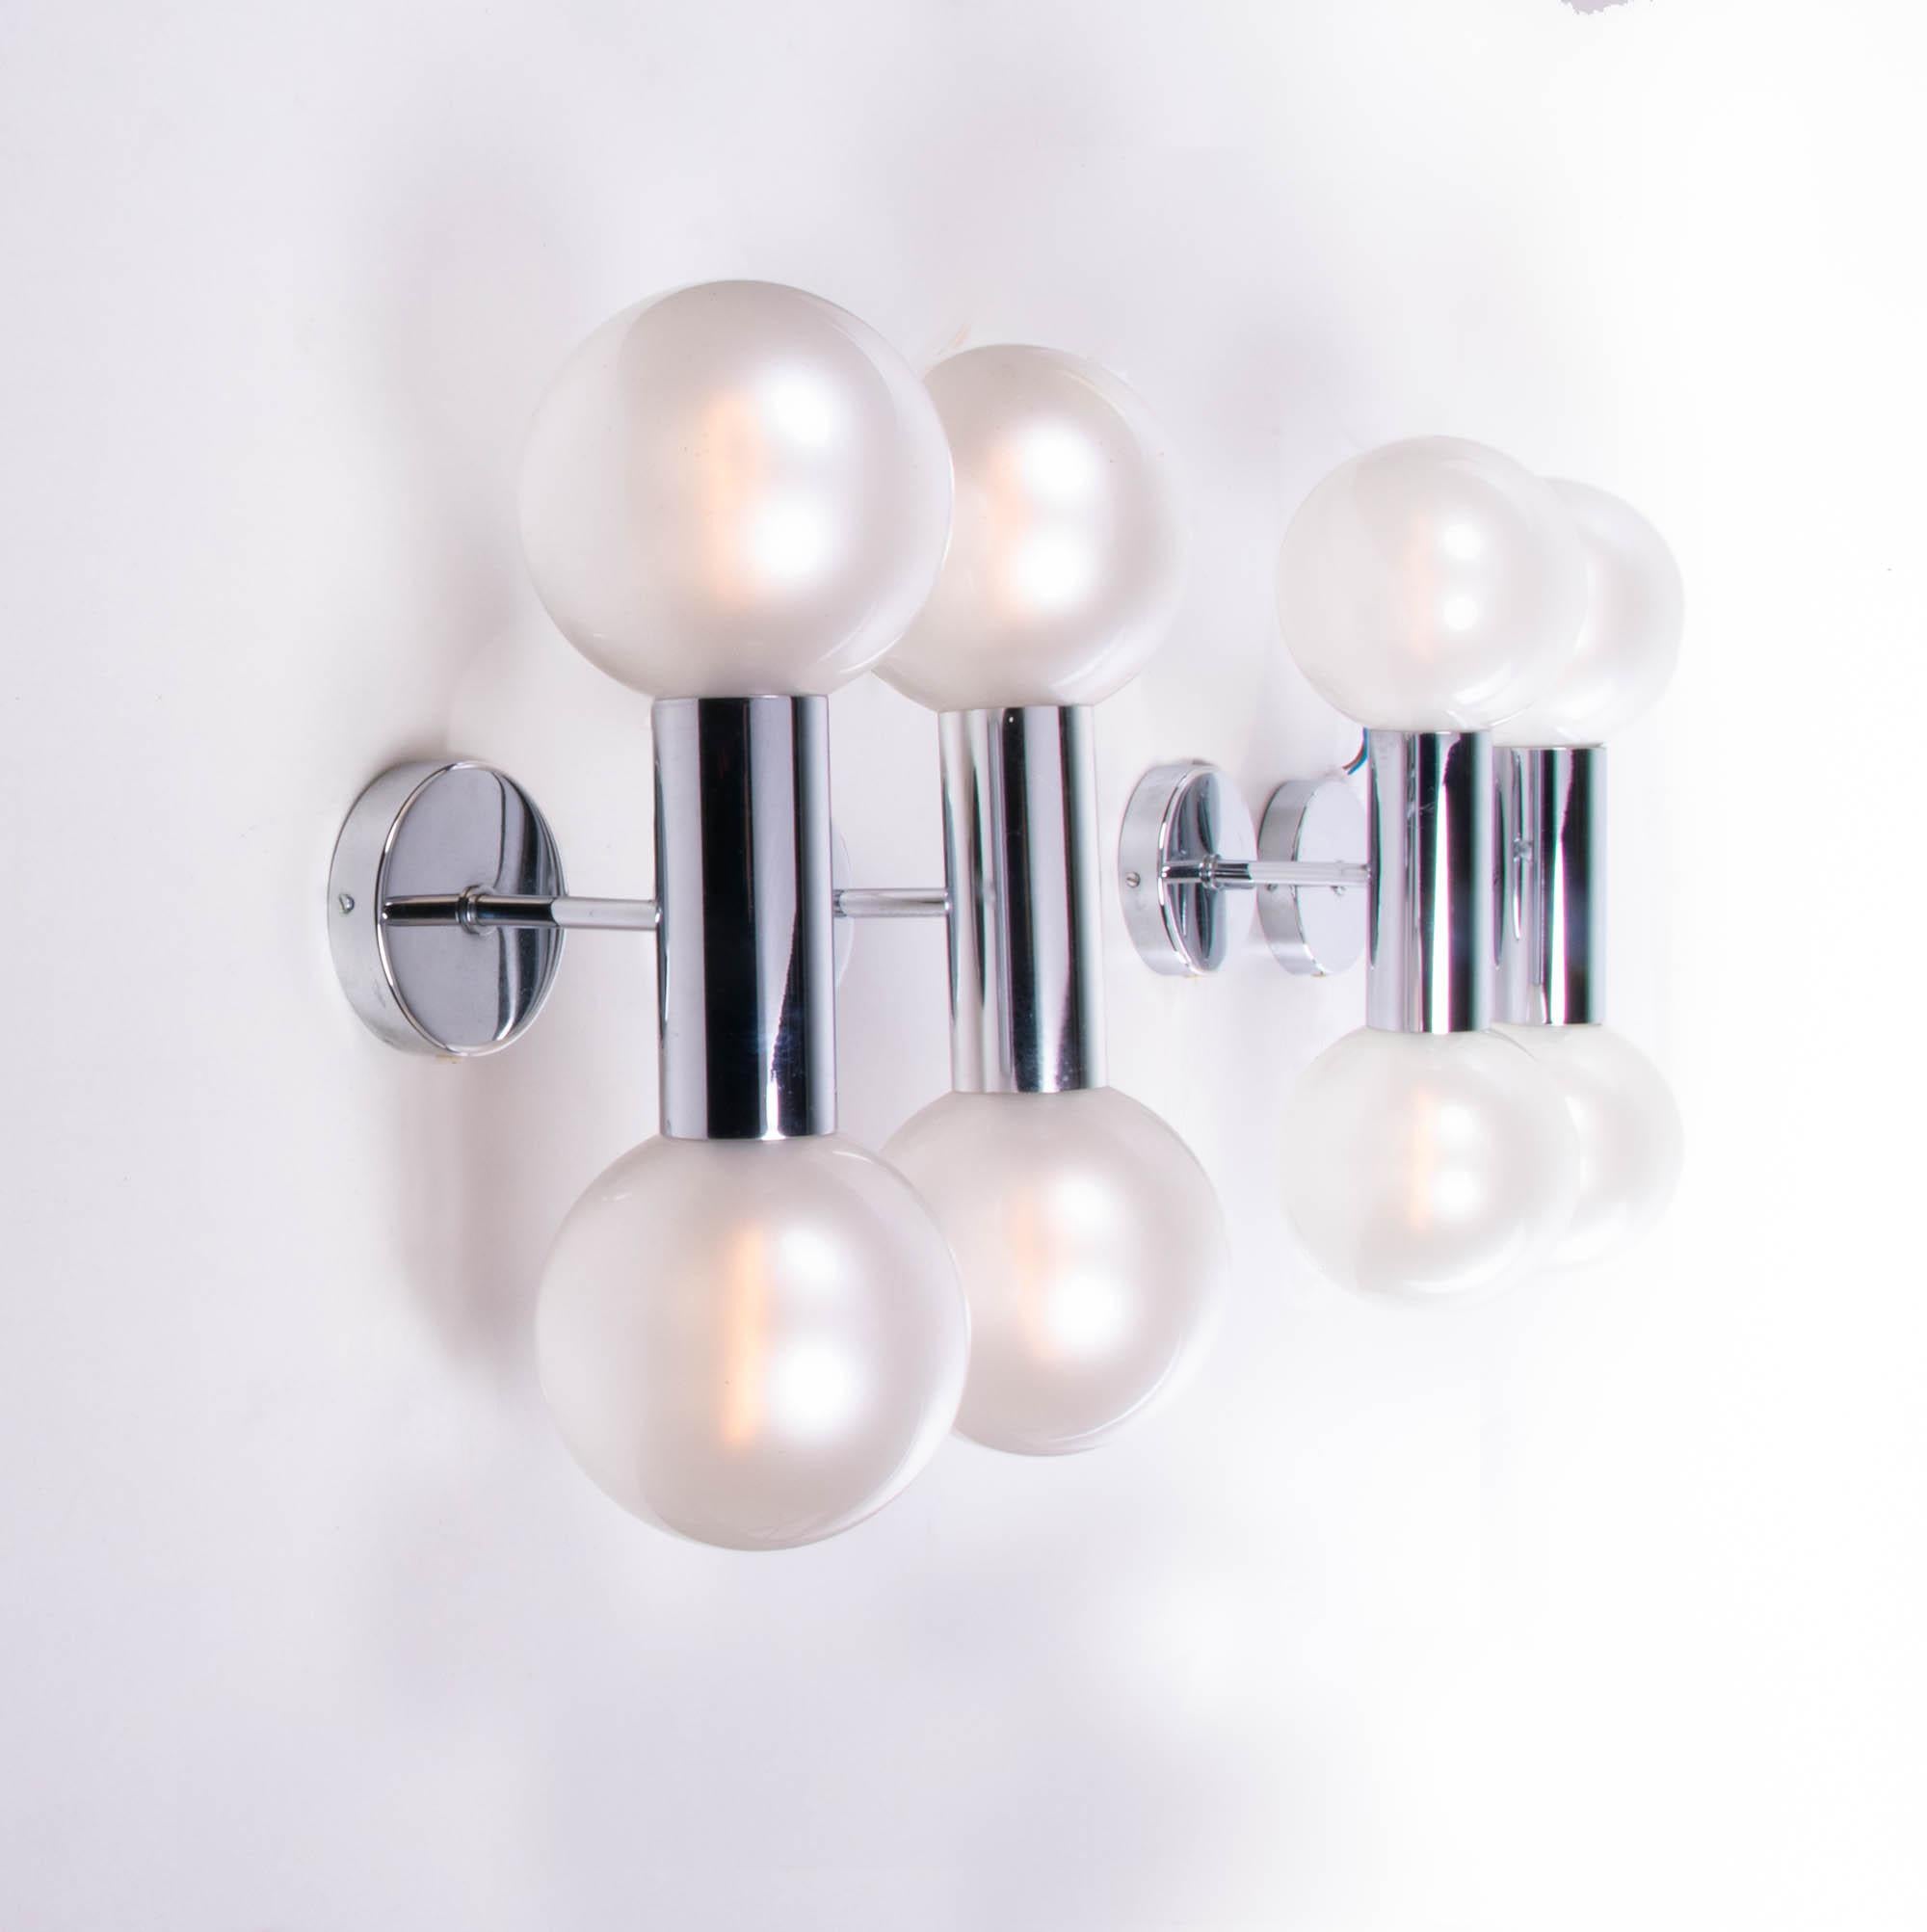 Elegant pair of sputnik wall sconces with pearlized shimmering handblown glass globes screwed on a chromed base. Designed by IF awarded designer Motoko Ishii for Staff Lighting, Germany, 1970s. 

Style: Sputnik, Space Age. 

Measures: approx. 14.5